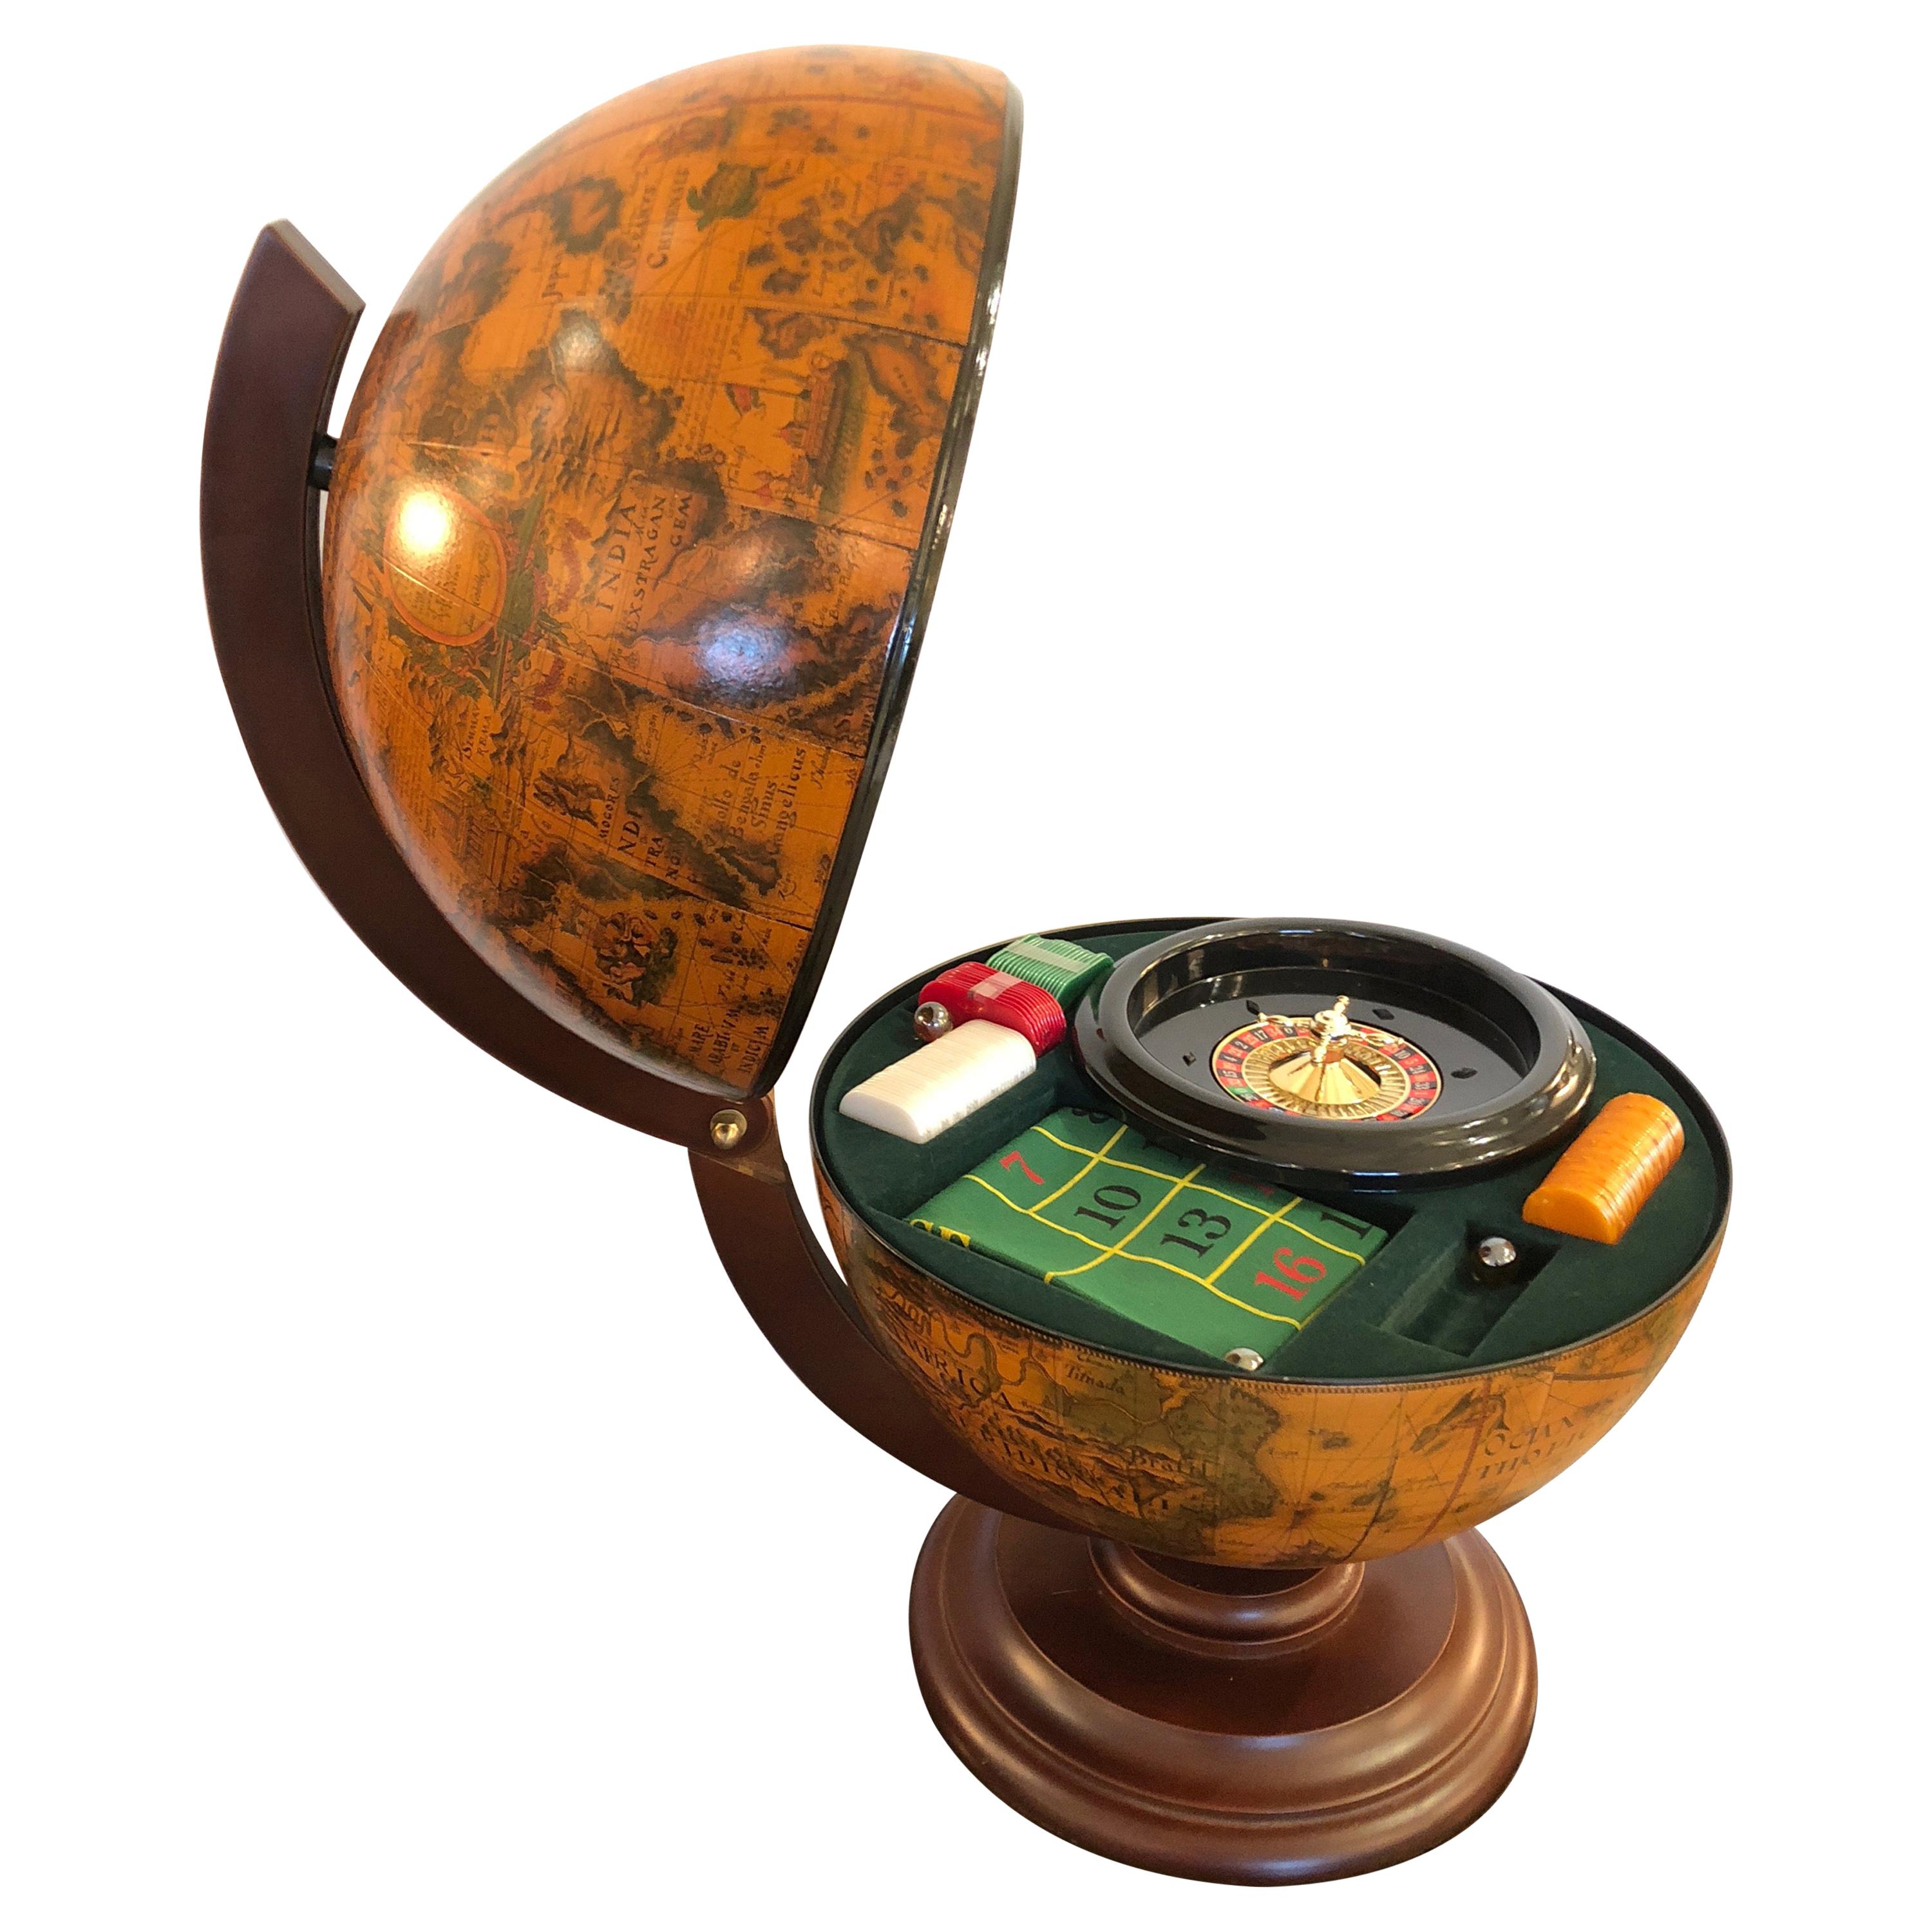 Rich Italian Globe with Roulette Game Interior